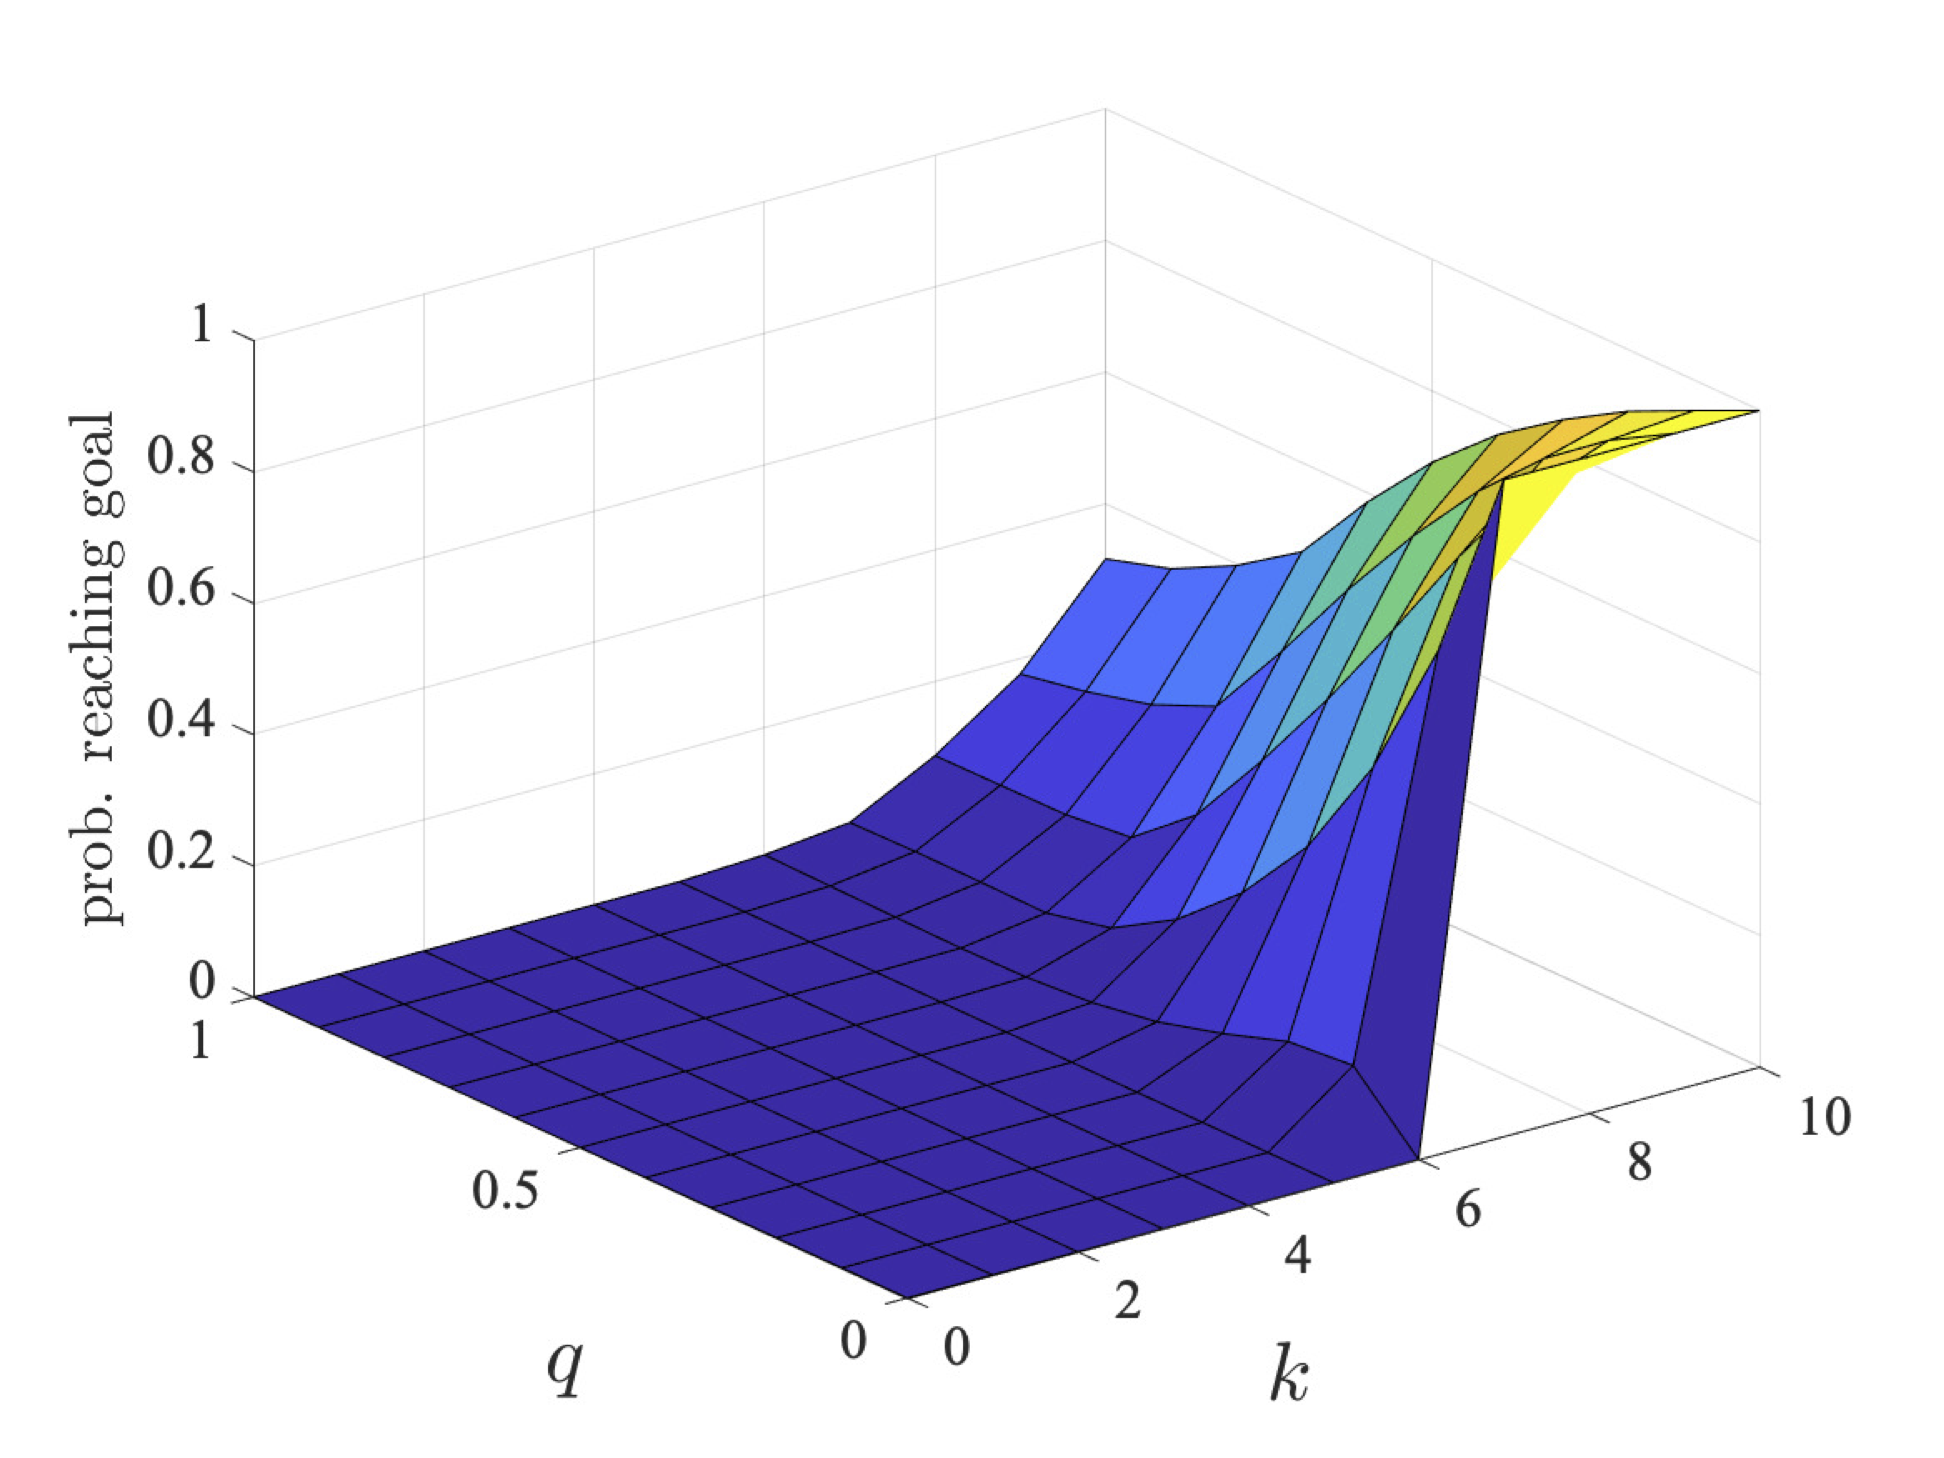 plot: maximum probability robot 1 can ensure they reach their goal within a deadline (l=7)